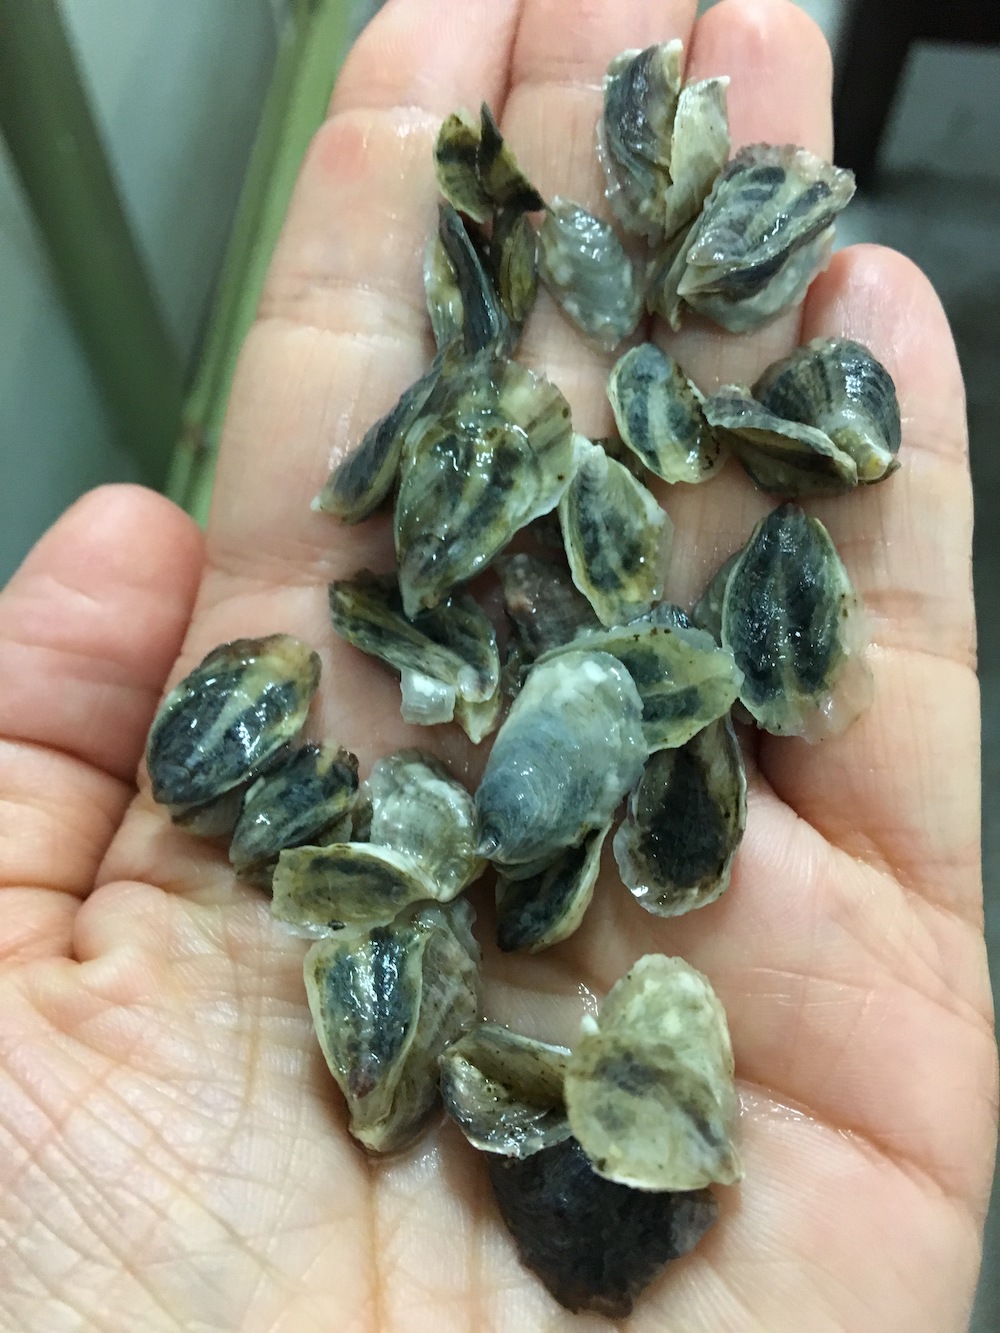 Healthy live juvenile Pacific oysters. Photo courtesy of Colleen Burge